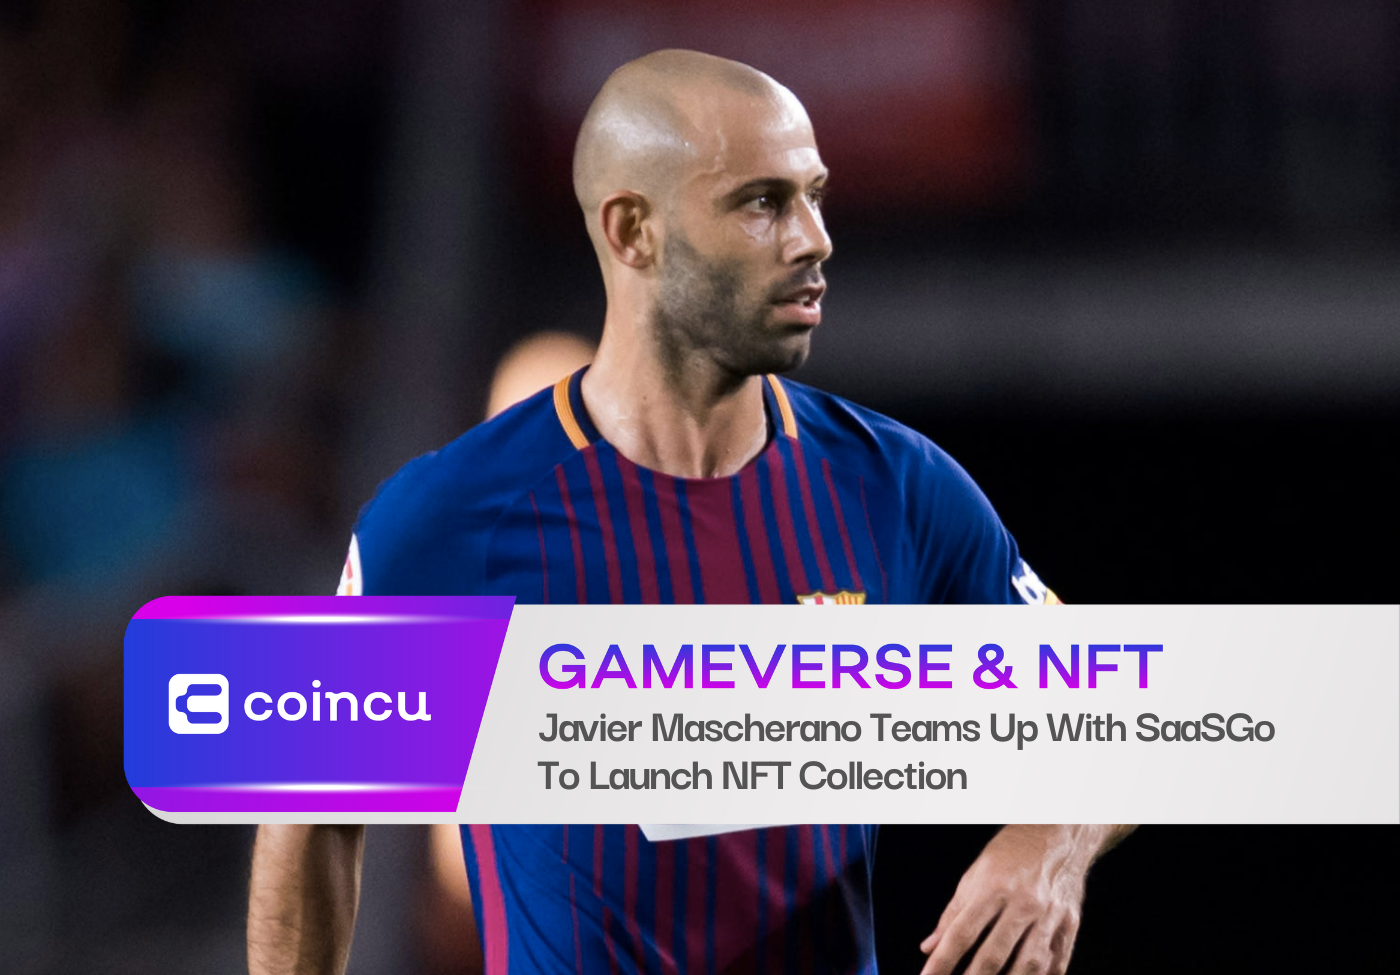 Javier Mascherano Teams Up With SaaSGo To Launch NFT Collection